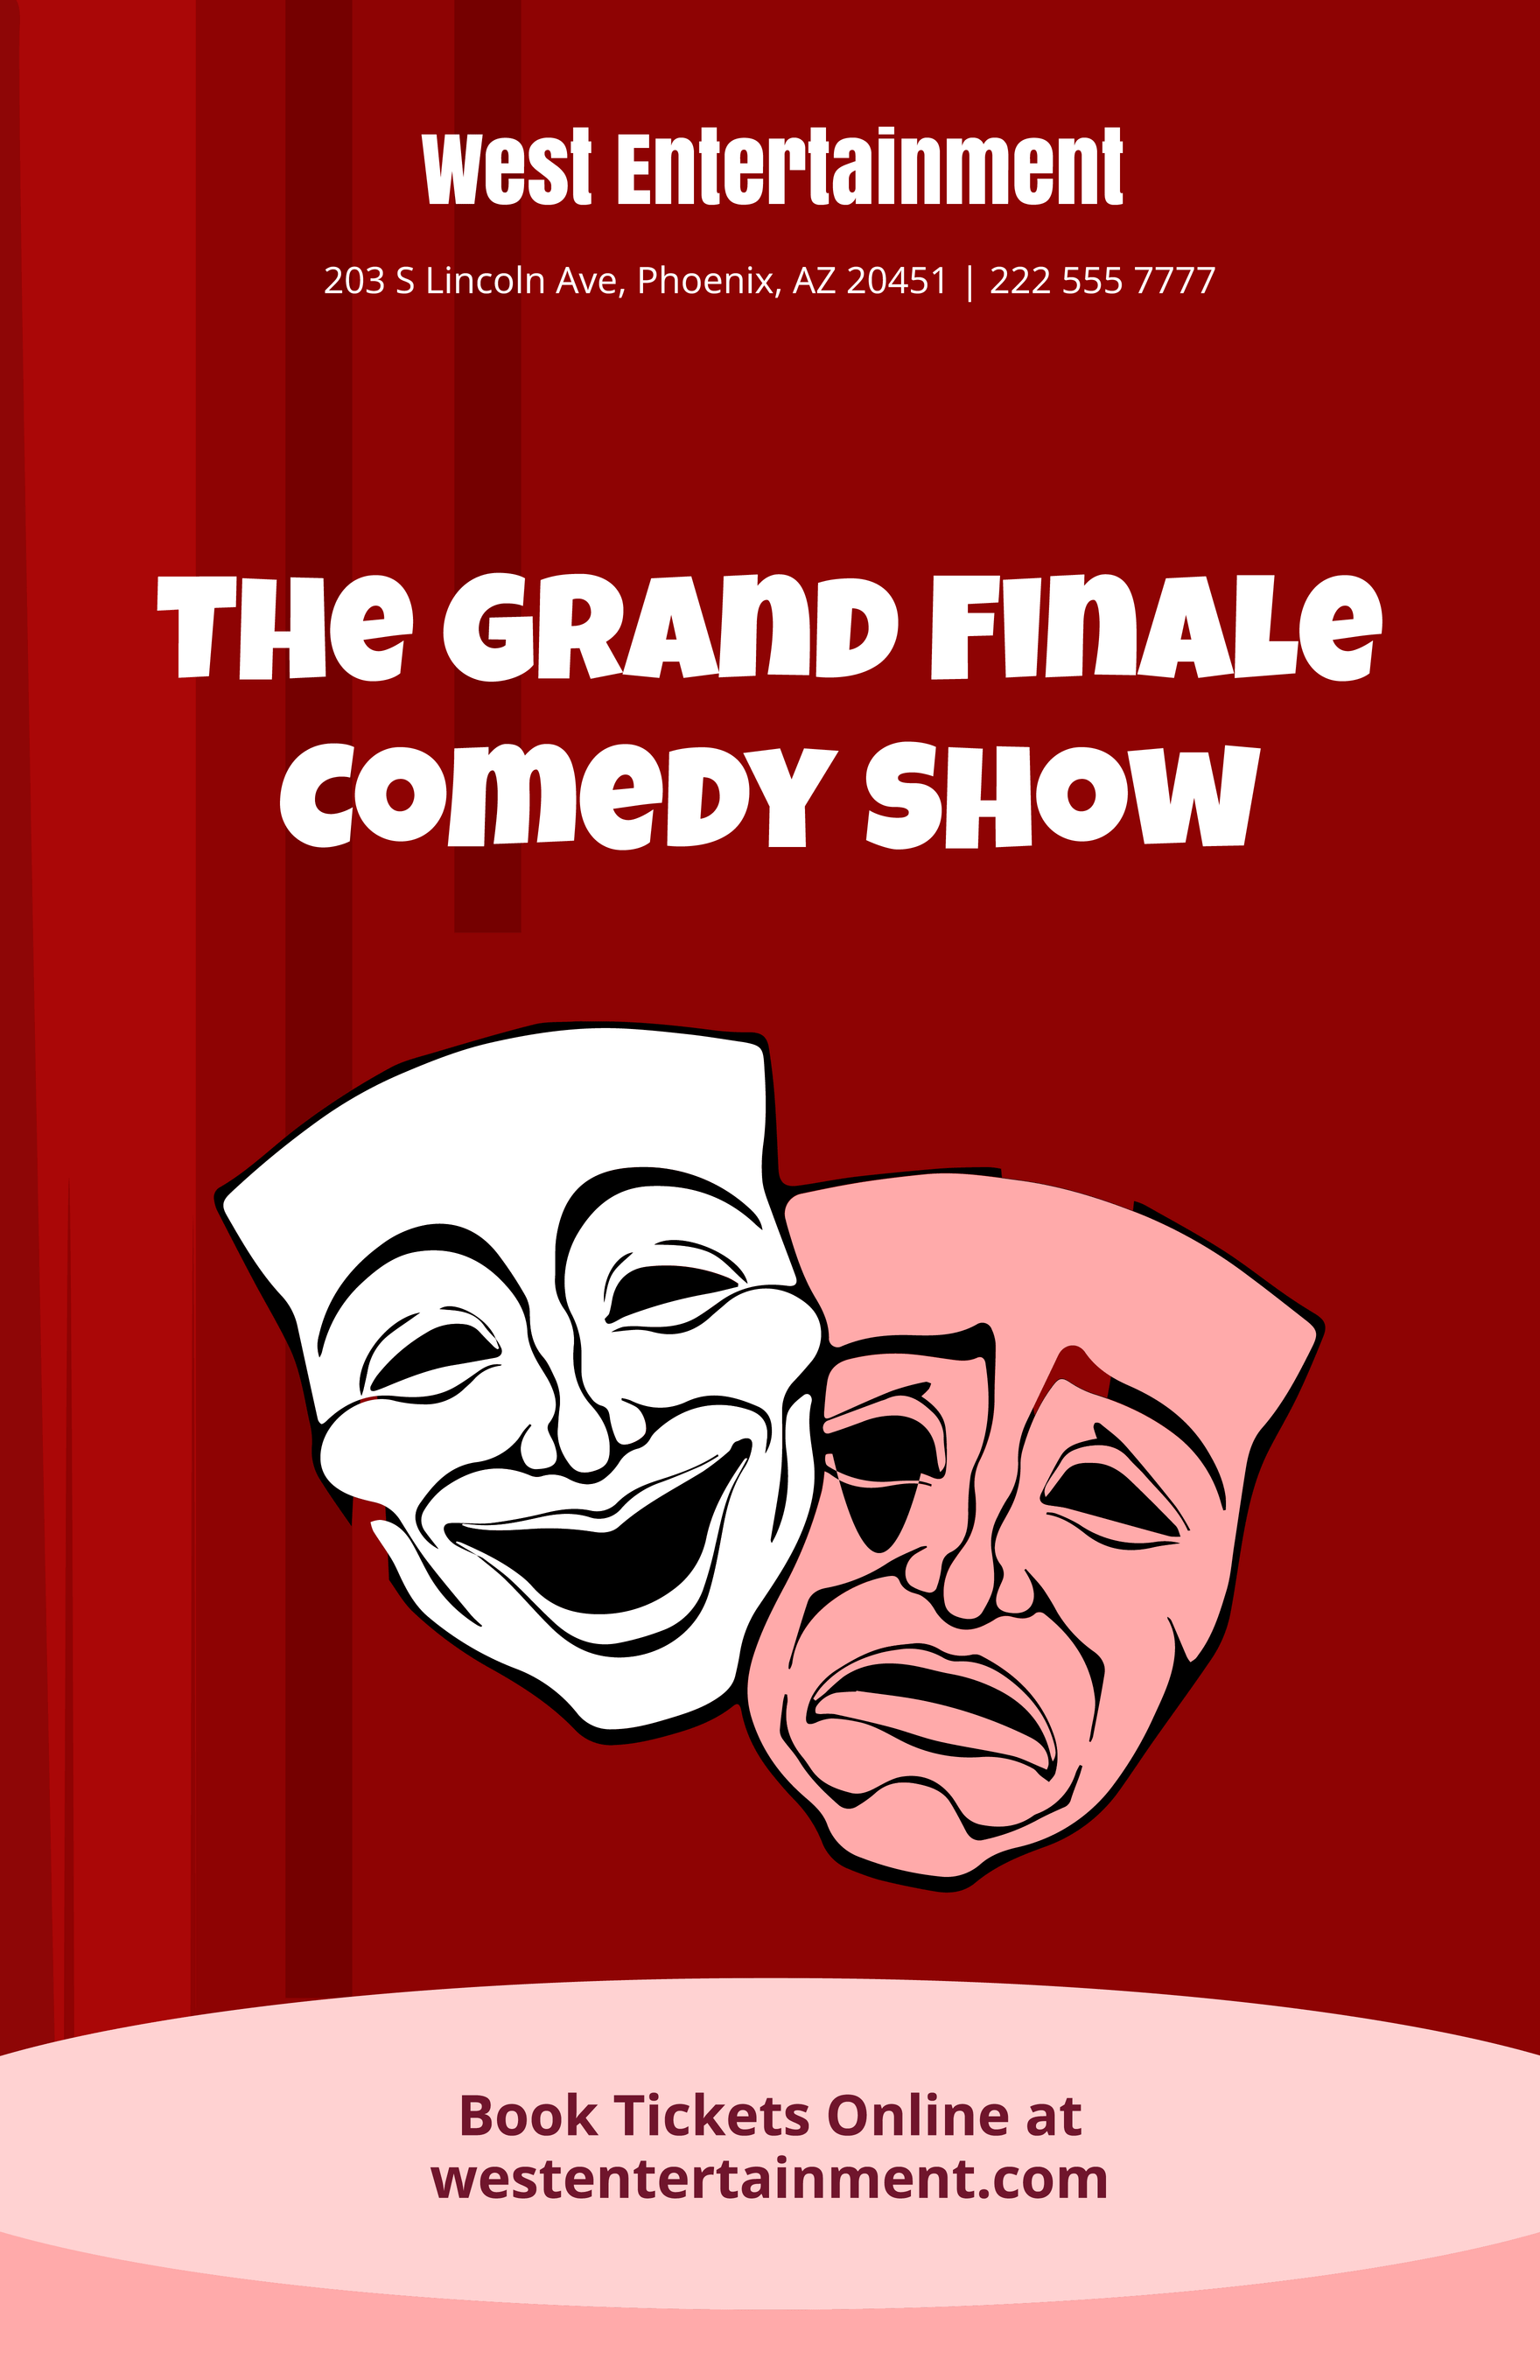 Simple Comedy Show Poster